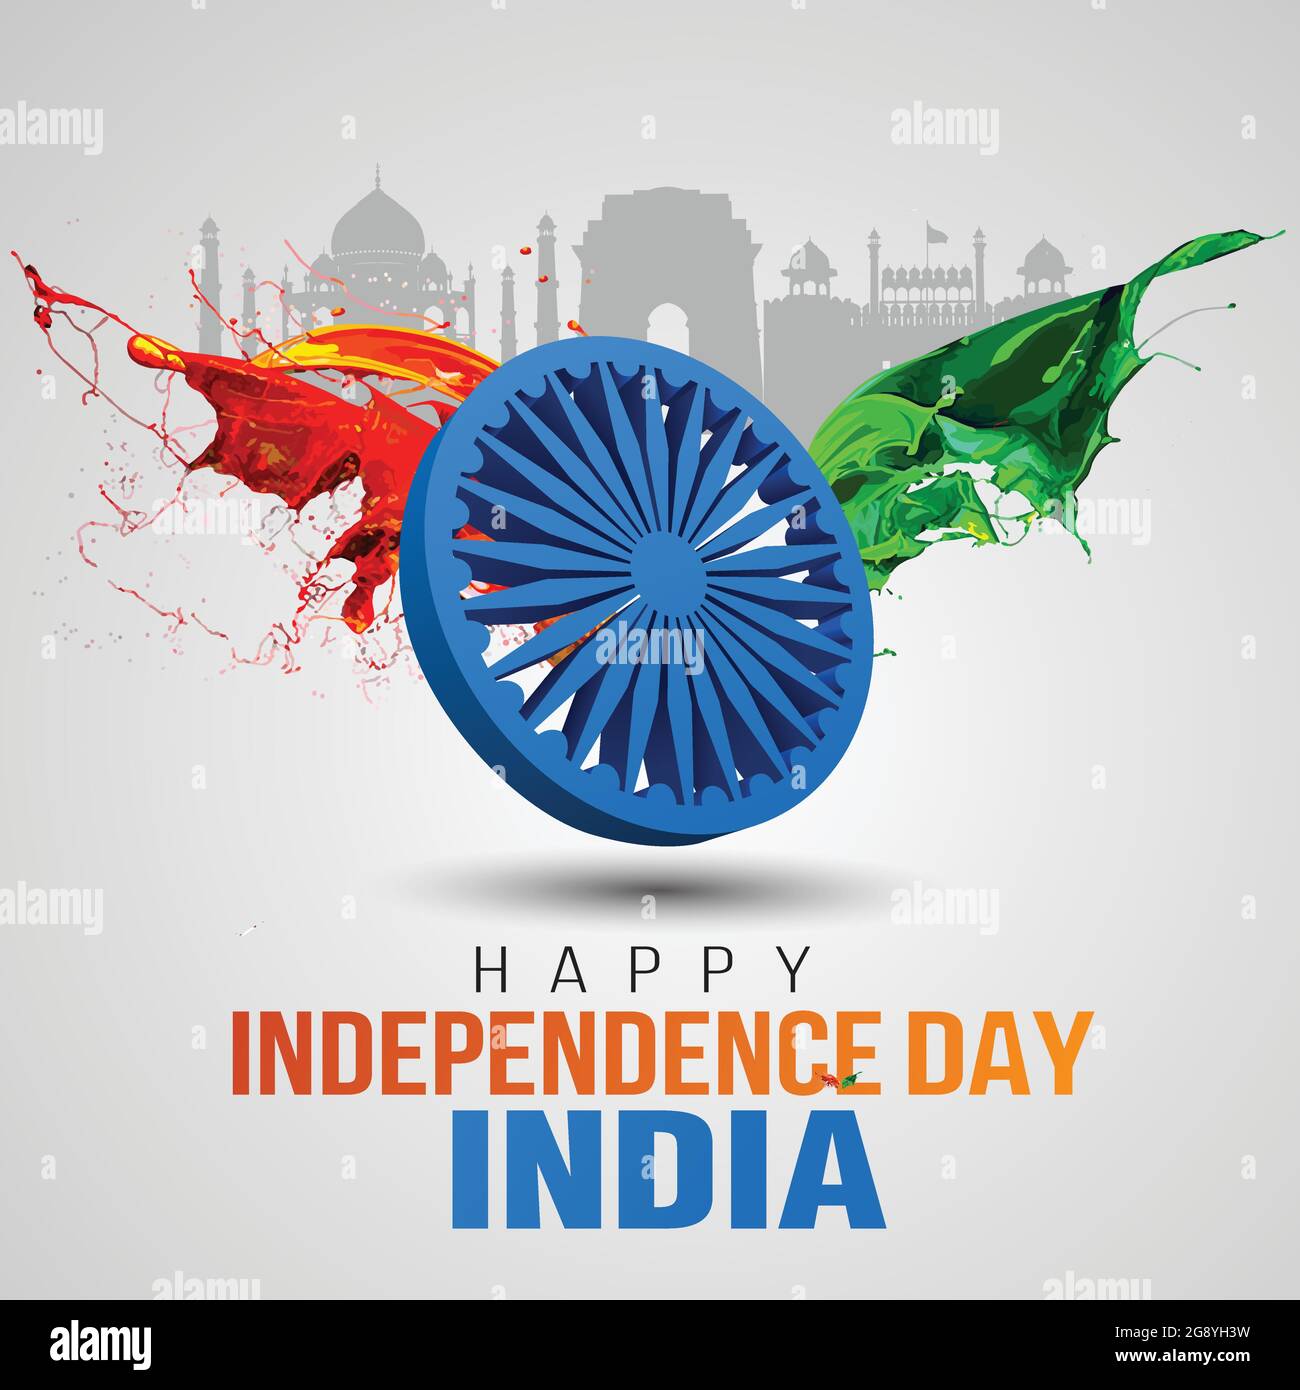 happy independence day India greetings. vector illustration design. Stock Vector